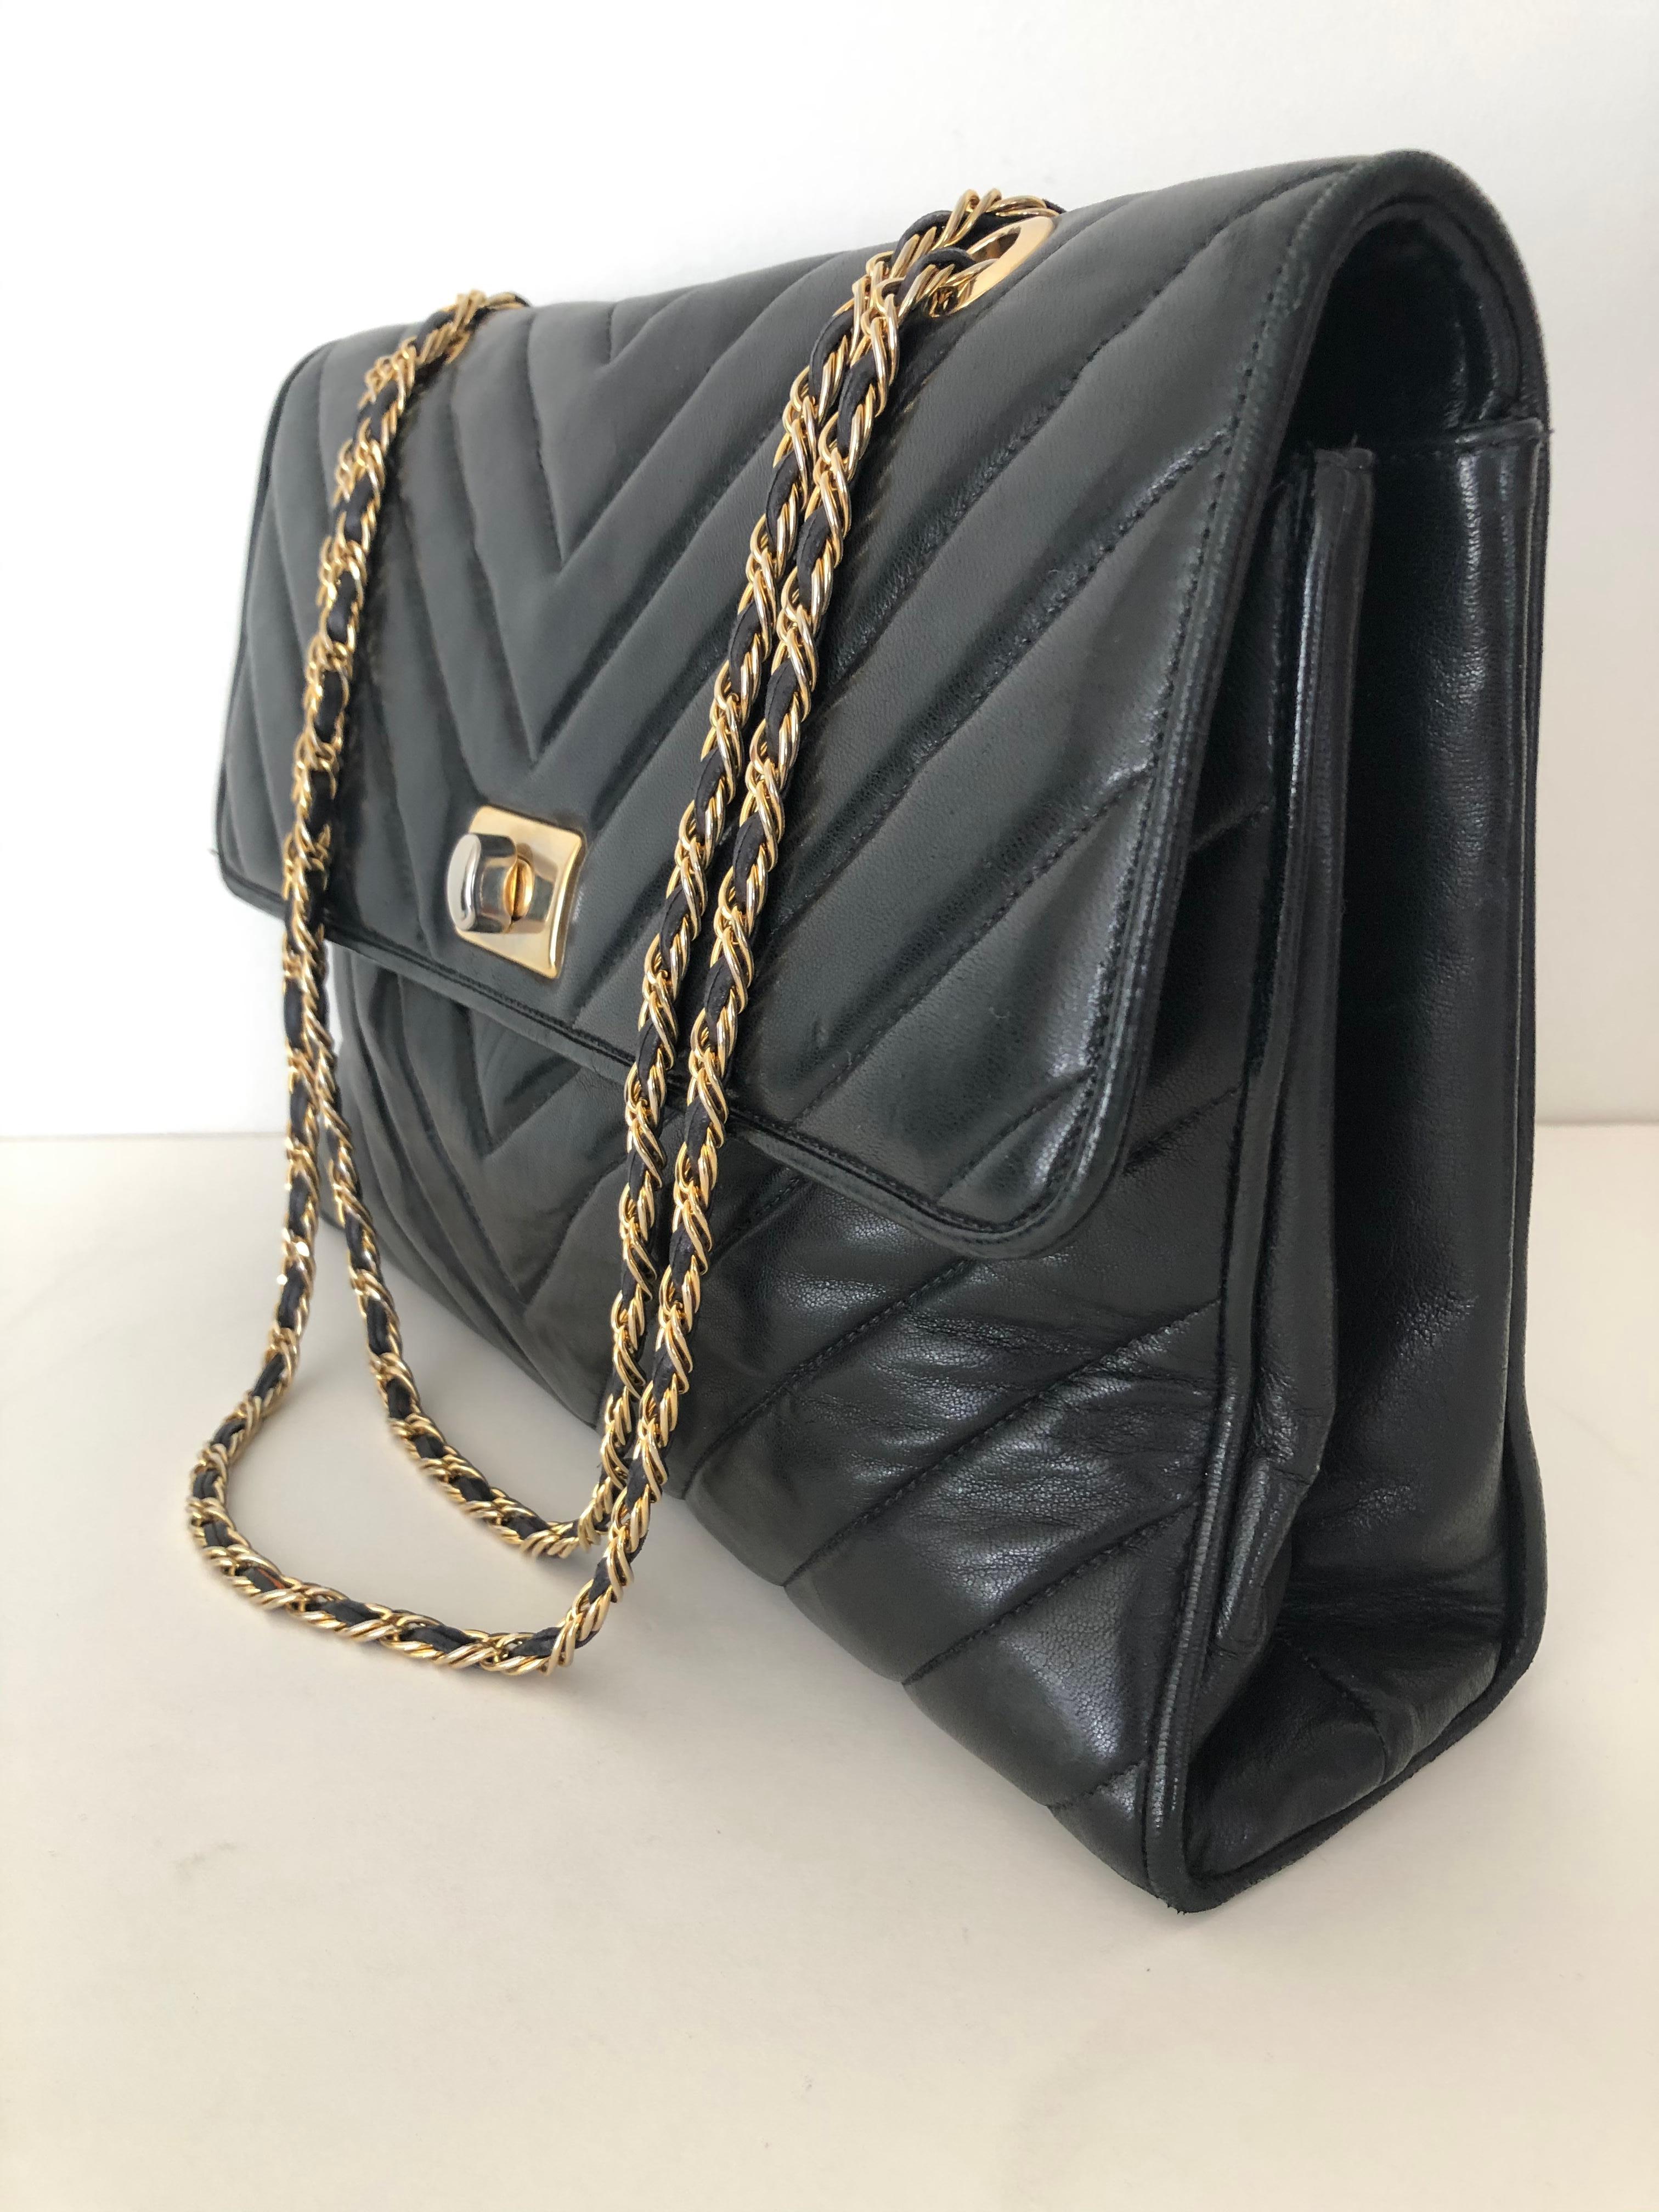 Black fine soft leather, channel design quilted large envelope shaped, double length long chain strap with leather woven, in very fine condition, top quality clean interior three compartment, zipper pouch . In the style of Chanel. Unmarked could be